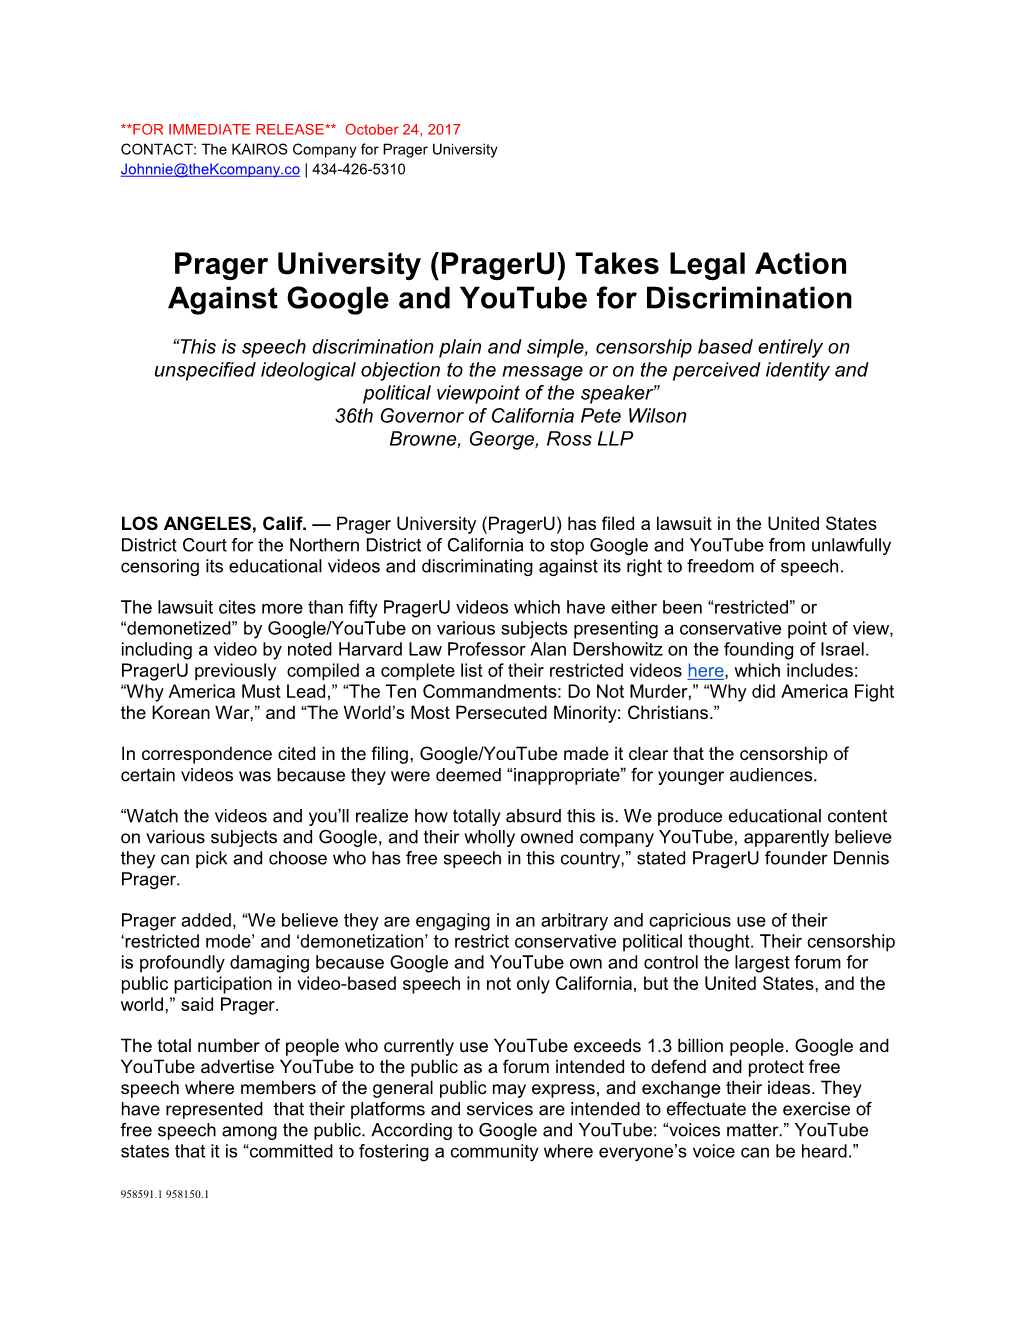 Prageru) Takes Legal Action Against Google and Youtube for Discrimination